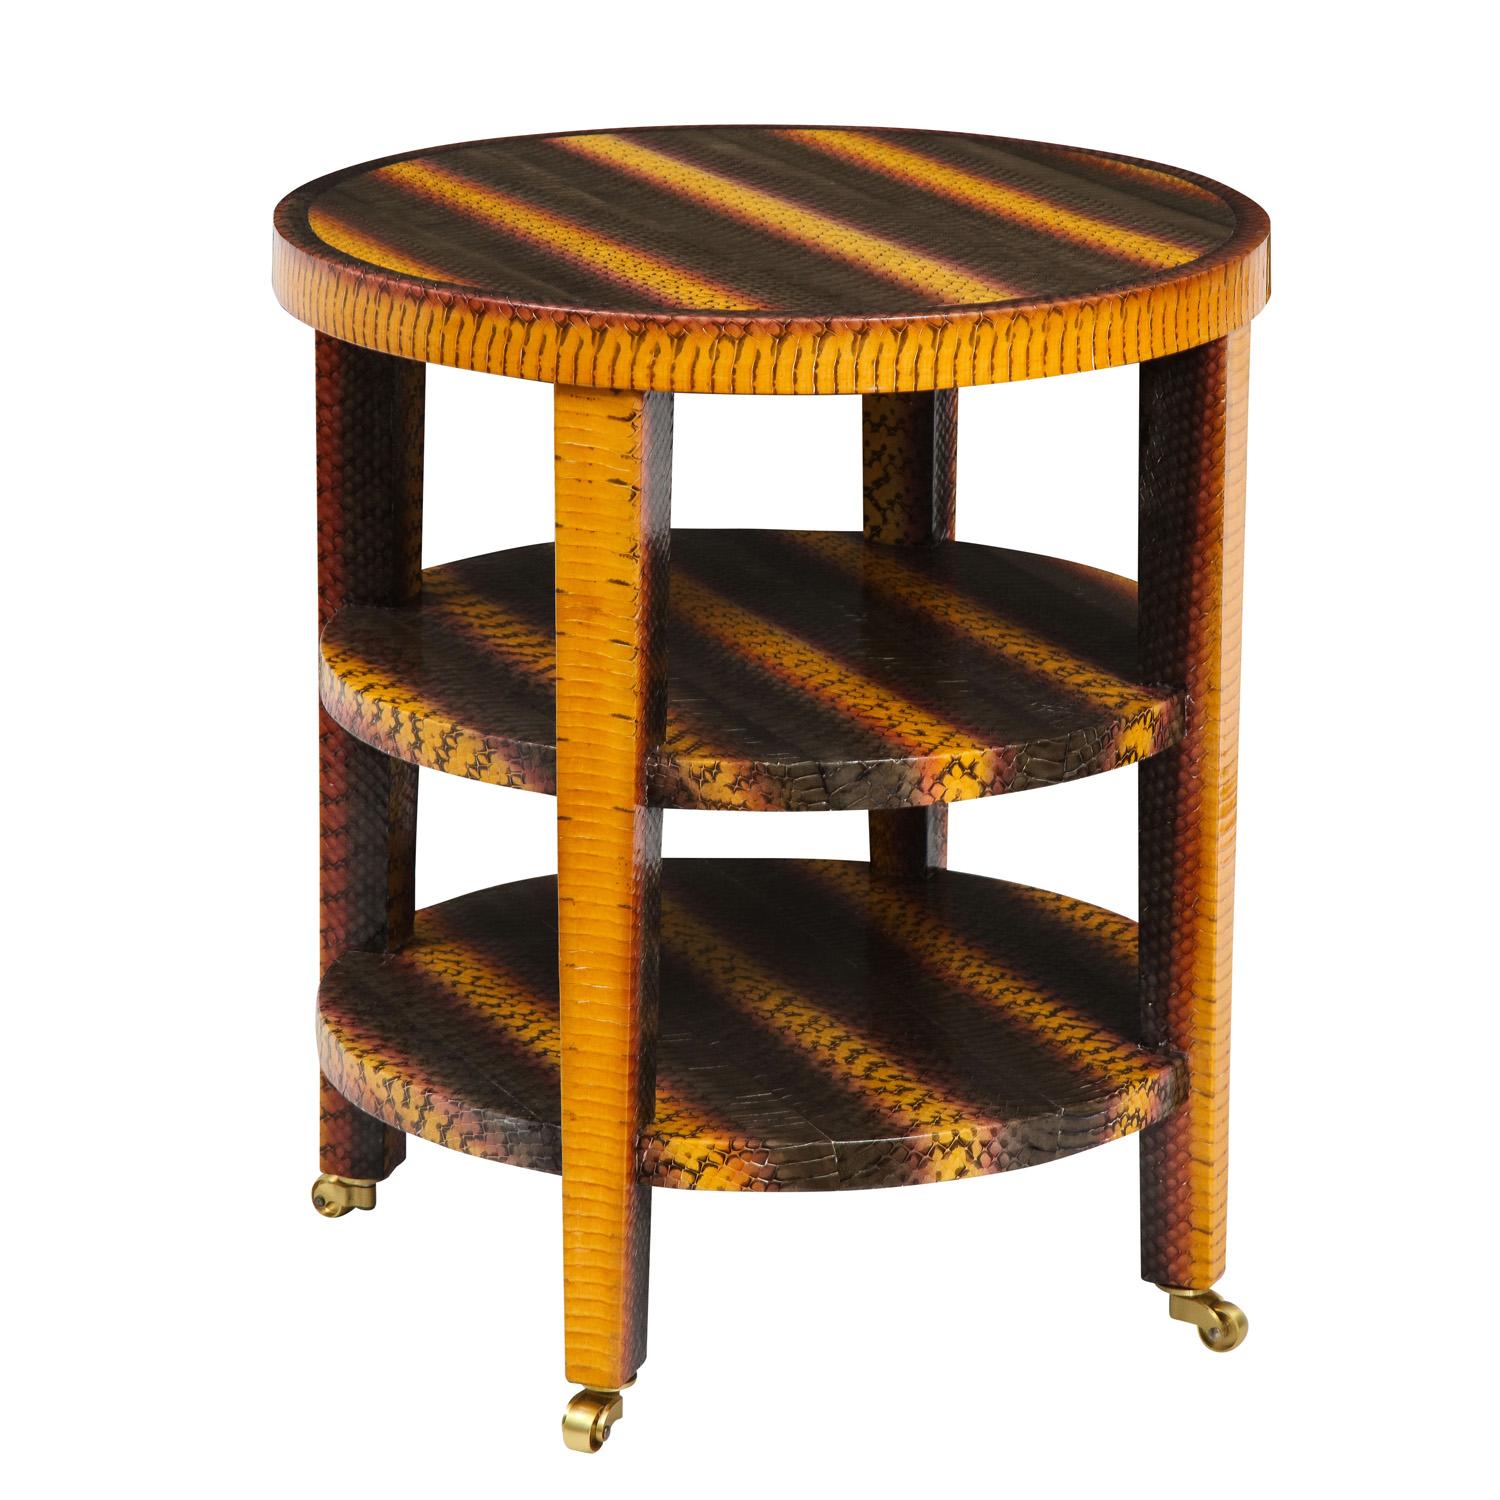 Round 3-tier side table covered in yellow, pink and gray snake skin on brass castors by Evan Lobel for Lobel Originals, American 2022. The colors and craftsmanship of this table are exceptional.